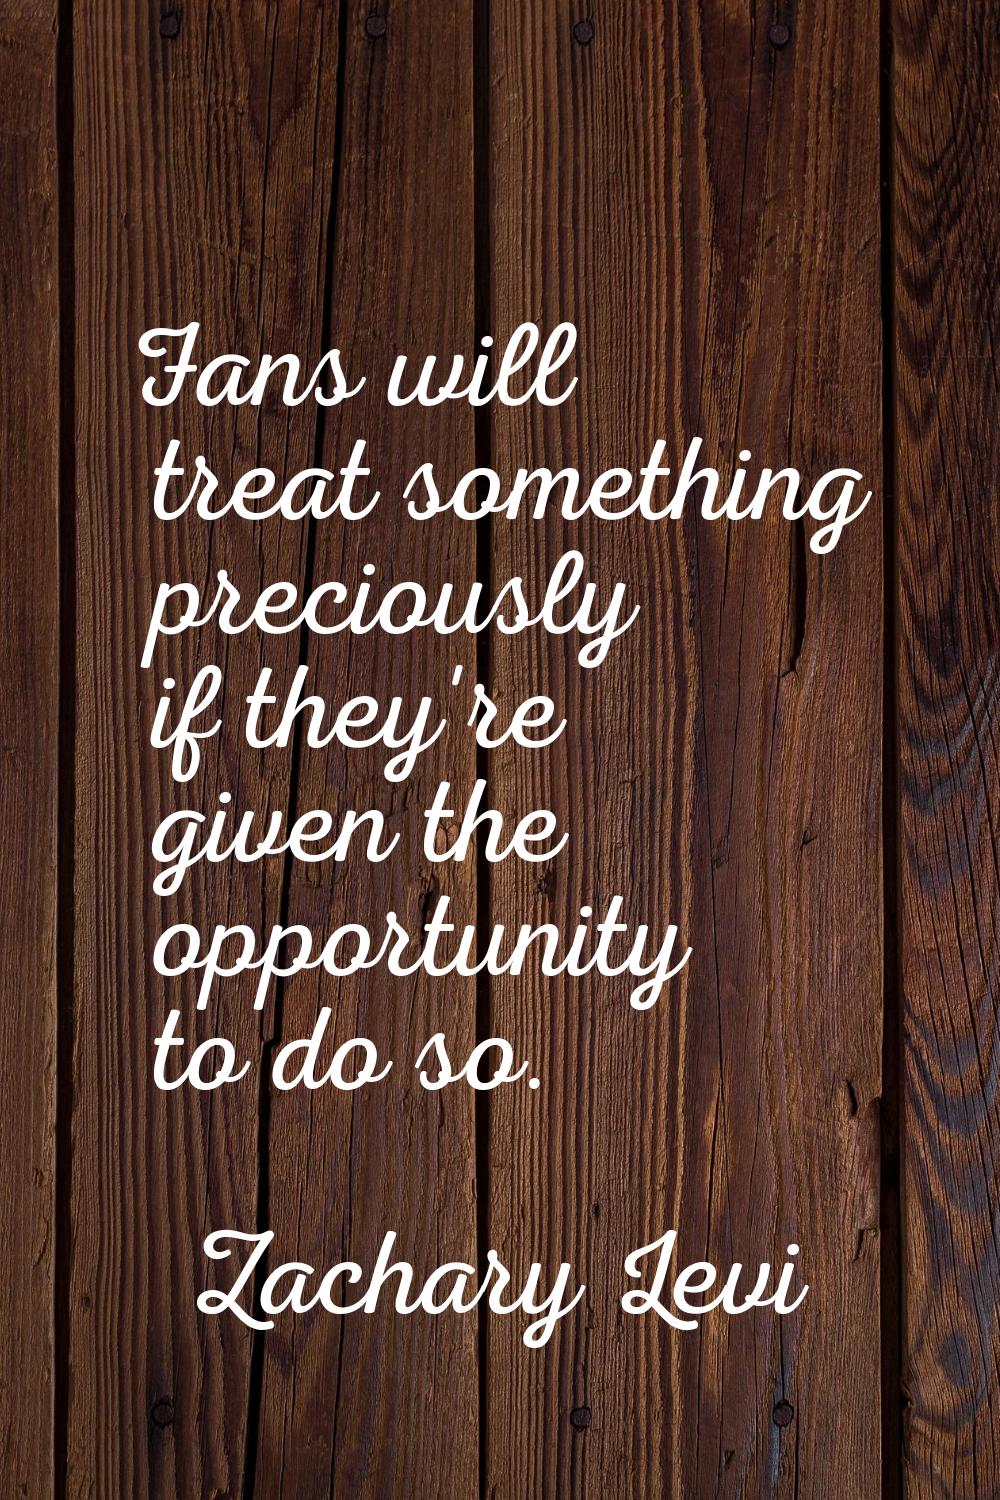 Fans will treat something preciously if they're given the opportunity to do so.